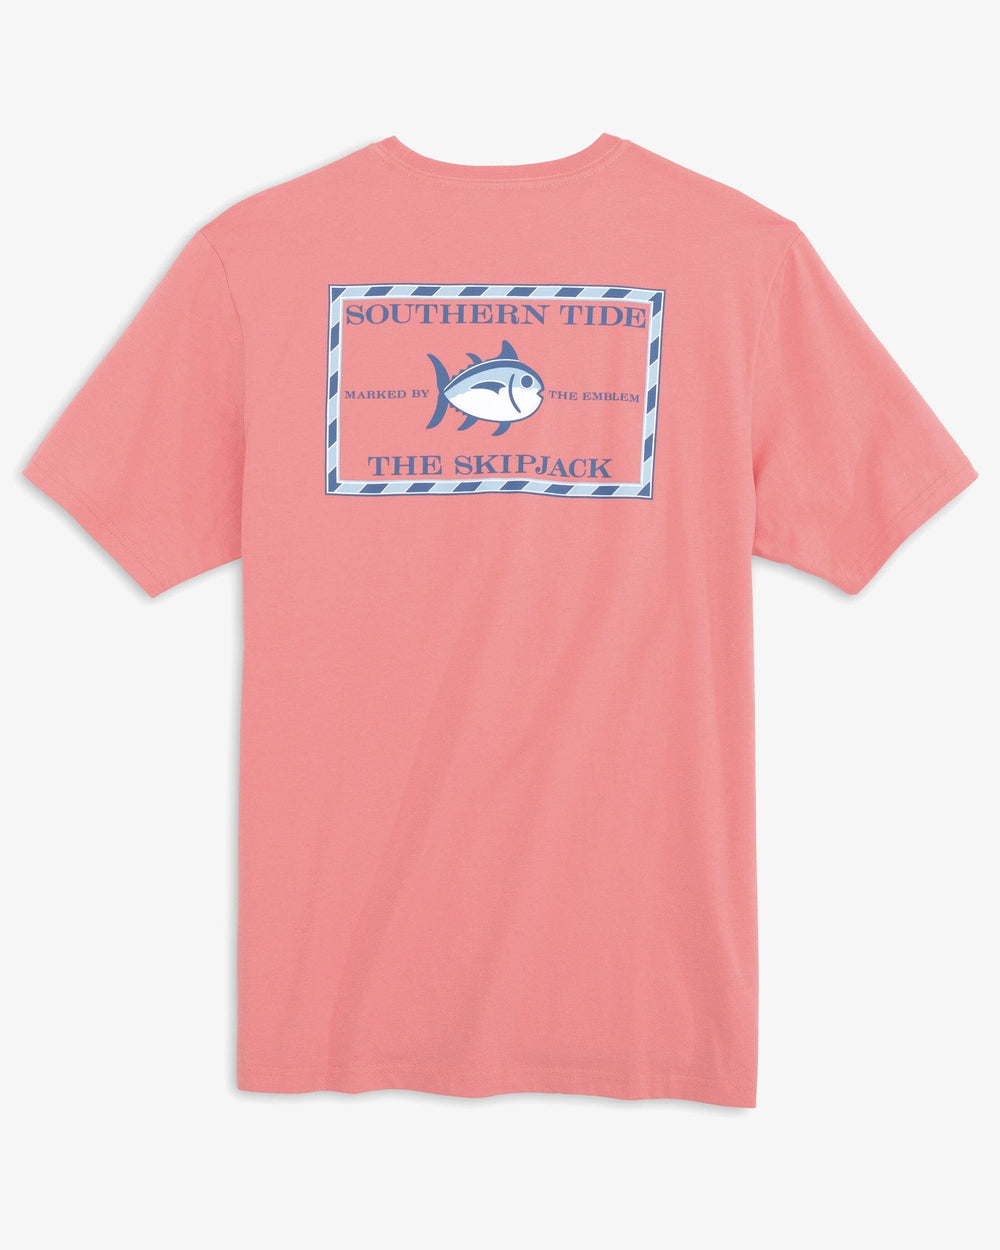 The back view of the Southern Tide Original Skipjack Short Sleeve T-Shirt by Southern Tide - Flamingo Pink